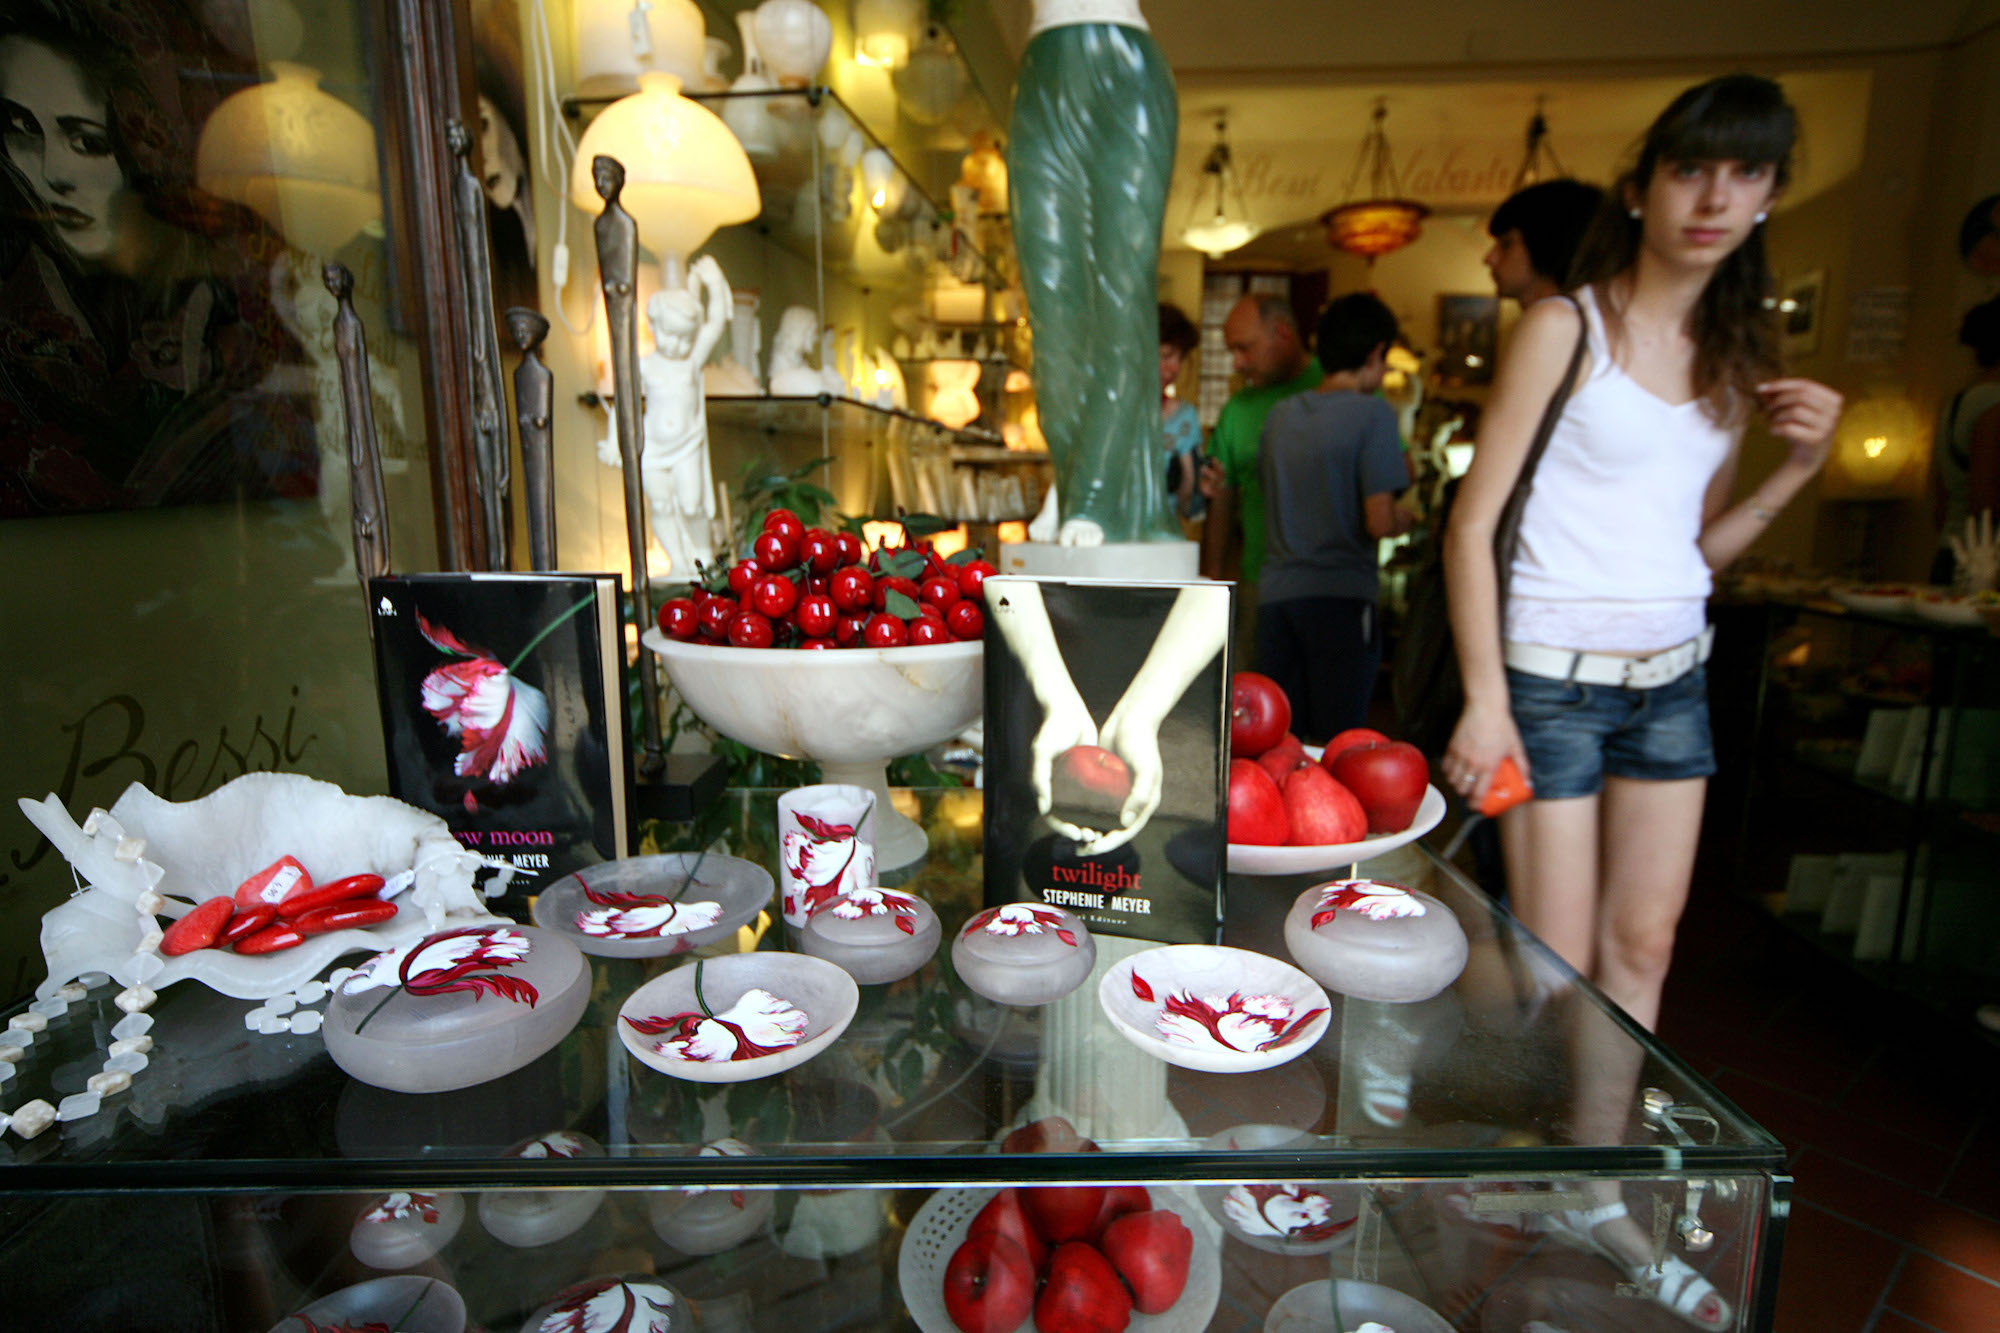 Tourists visit 'New Moon' and 'Twilight' merch stores on June 29, 2009 in Volterra, Italy, a place named in 'New Moon'